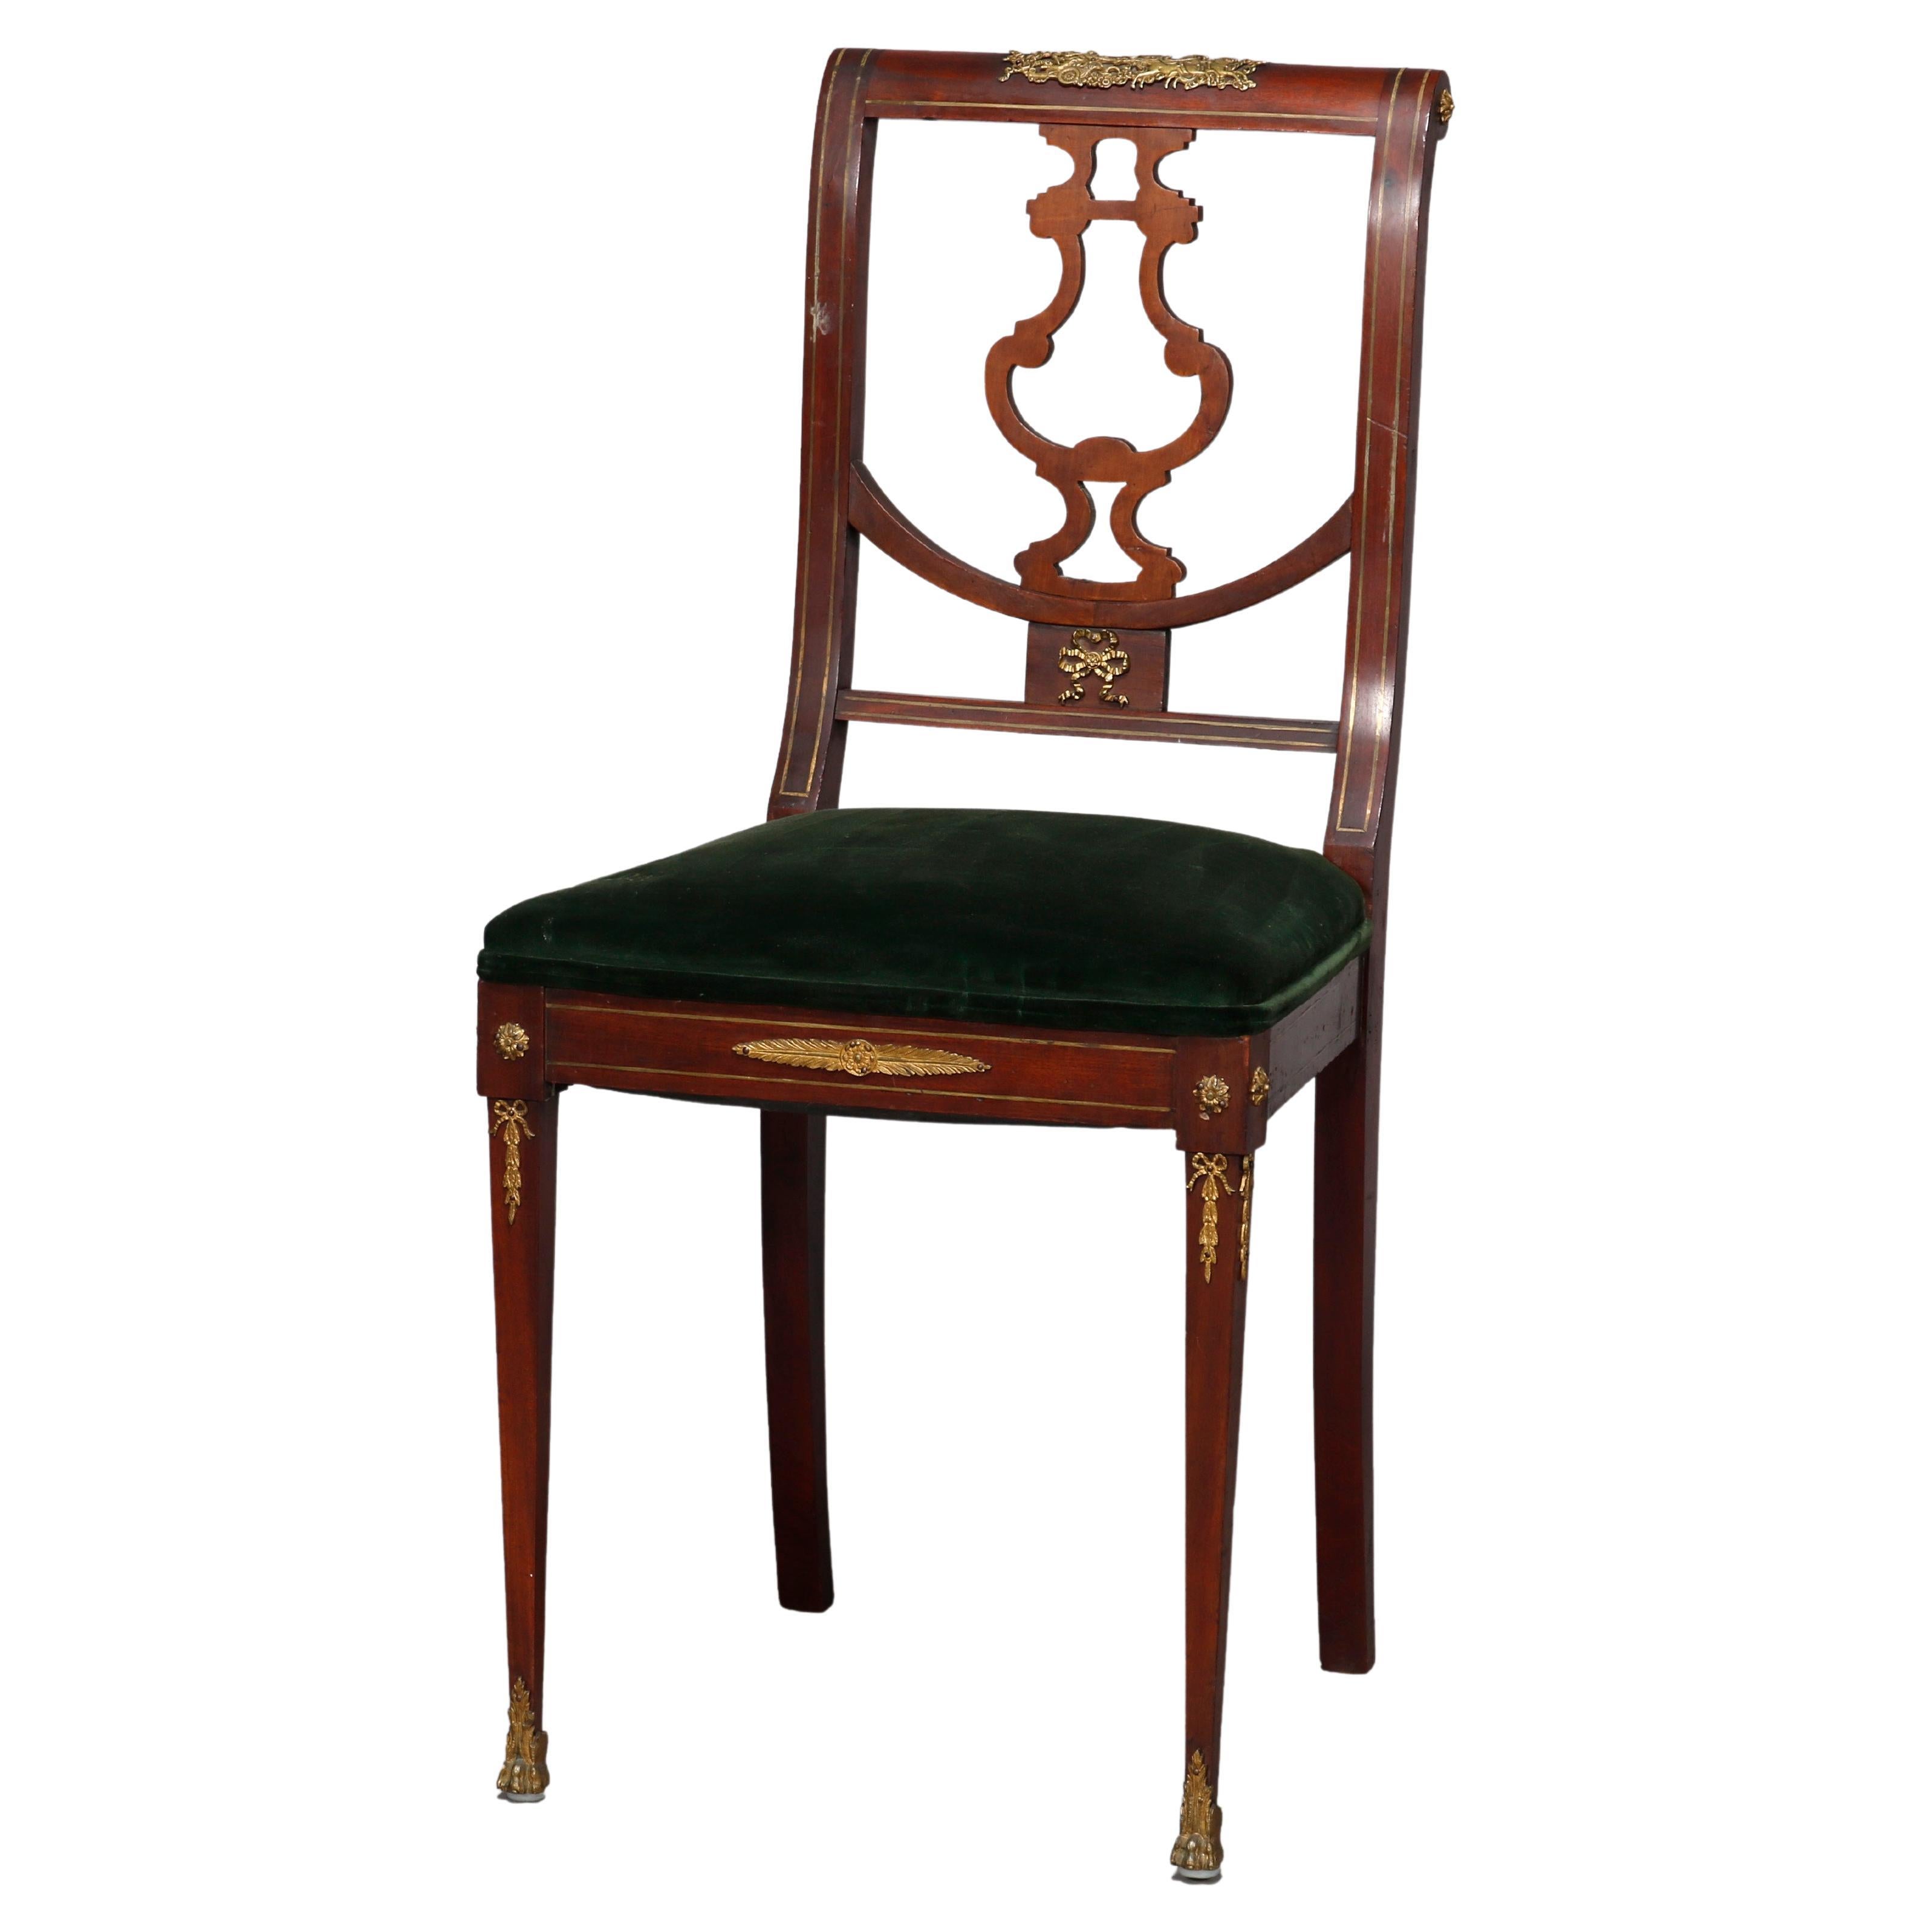 Antique French Empire Mahogany Side chair with Ormolu Mounts 19th C For Sale